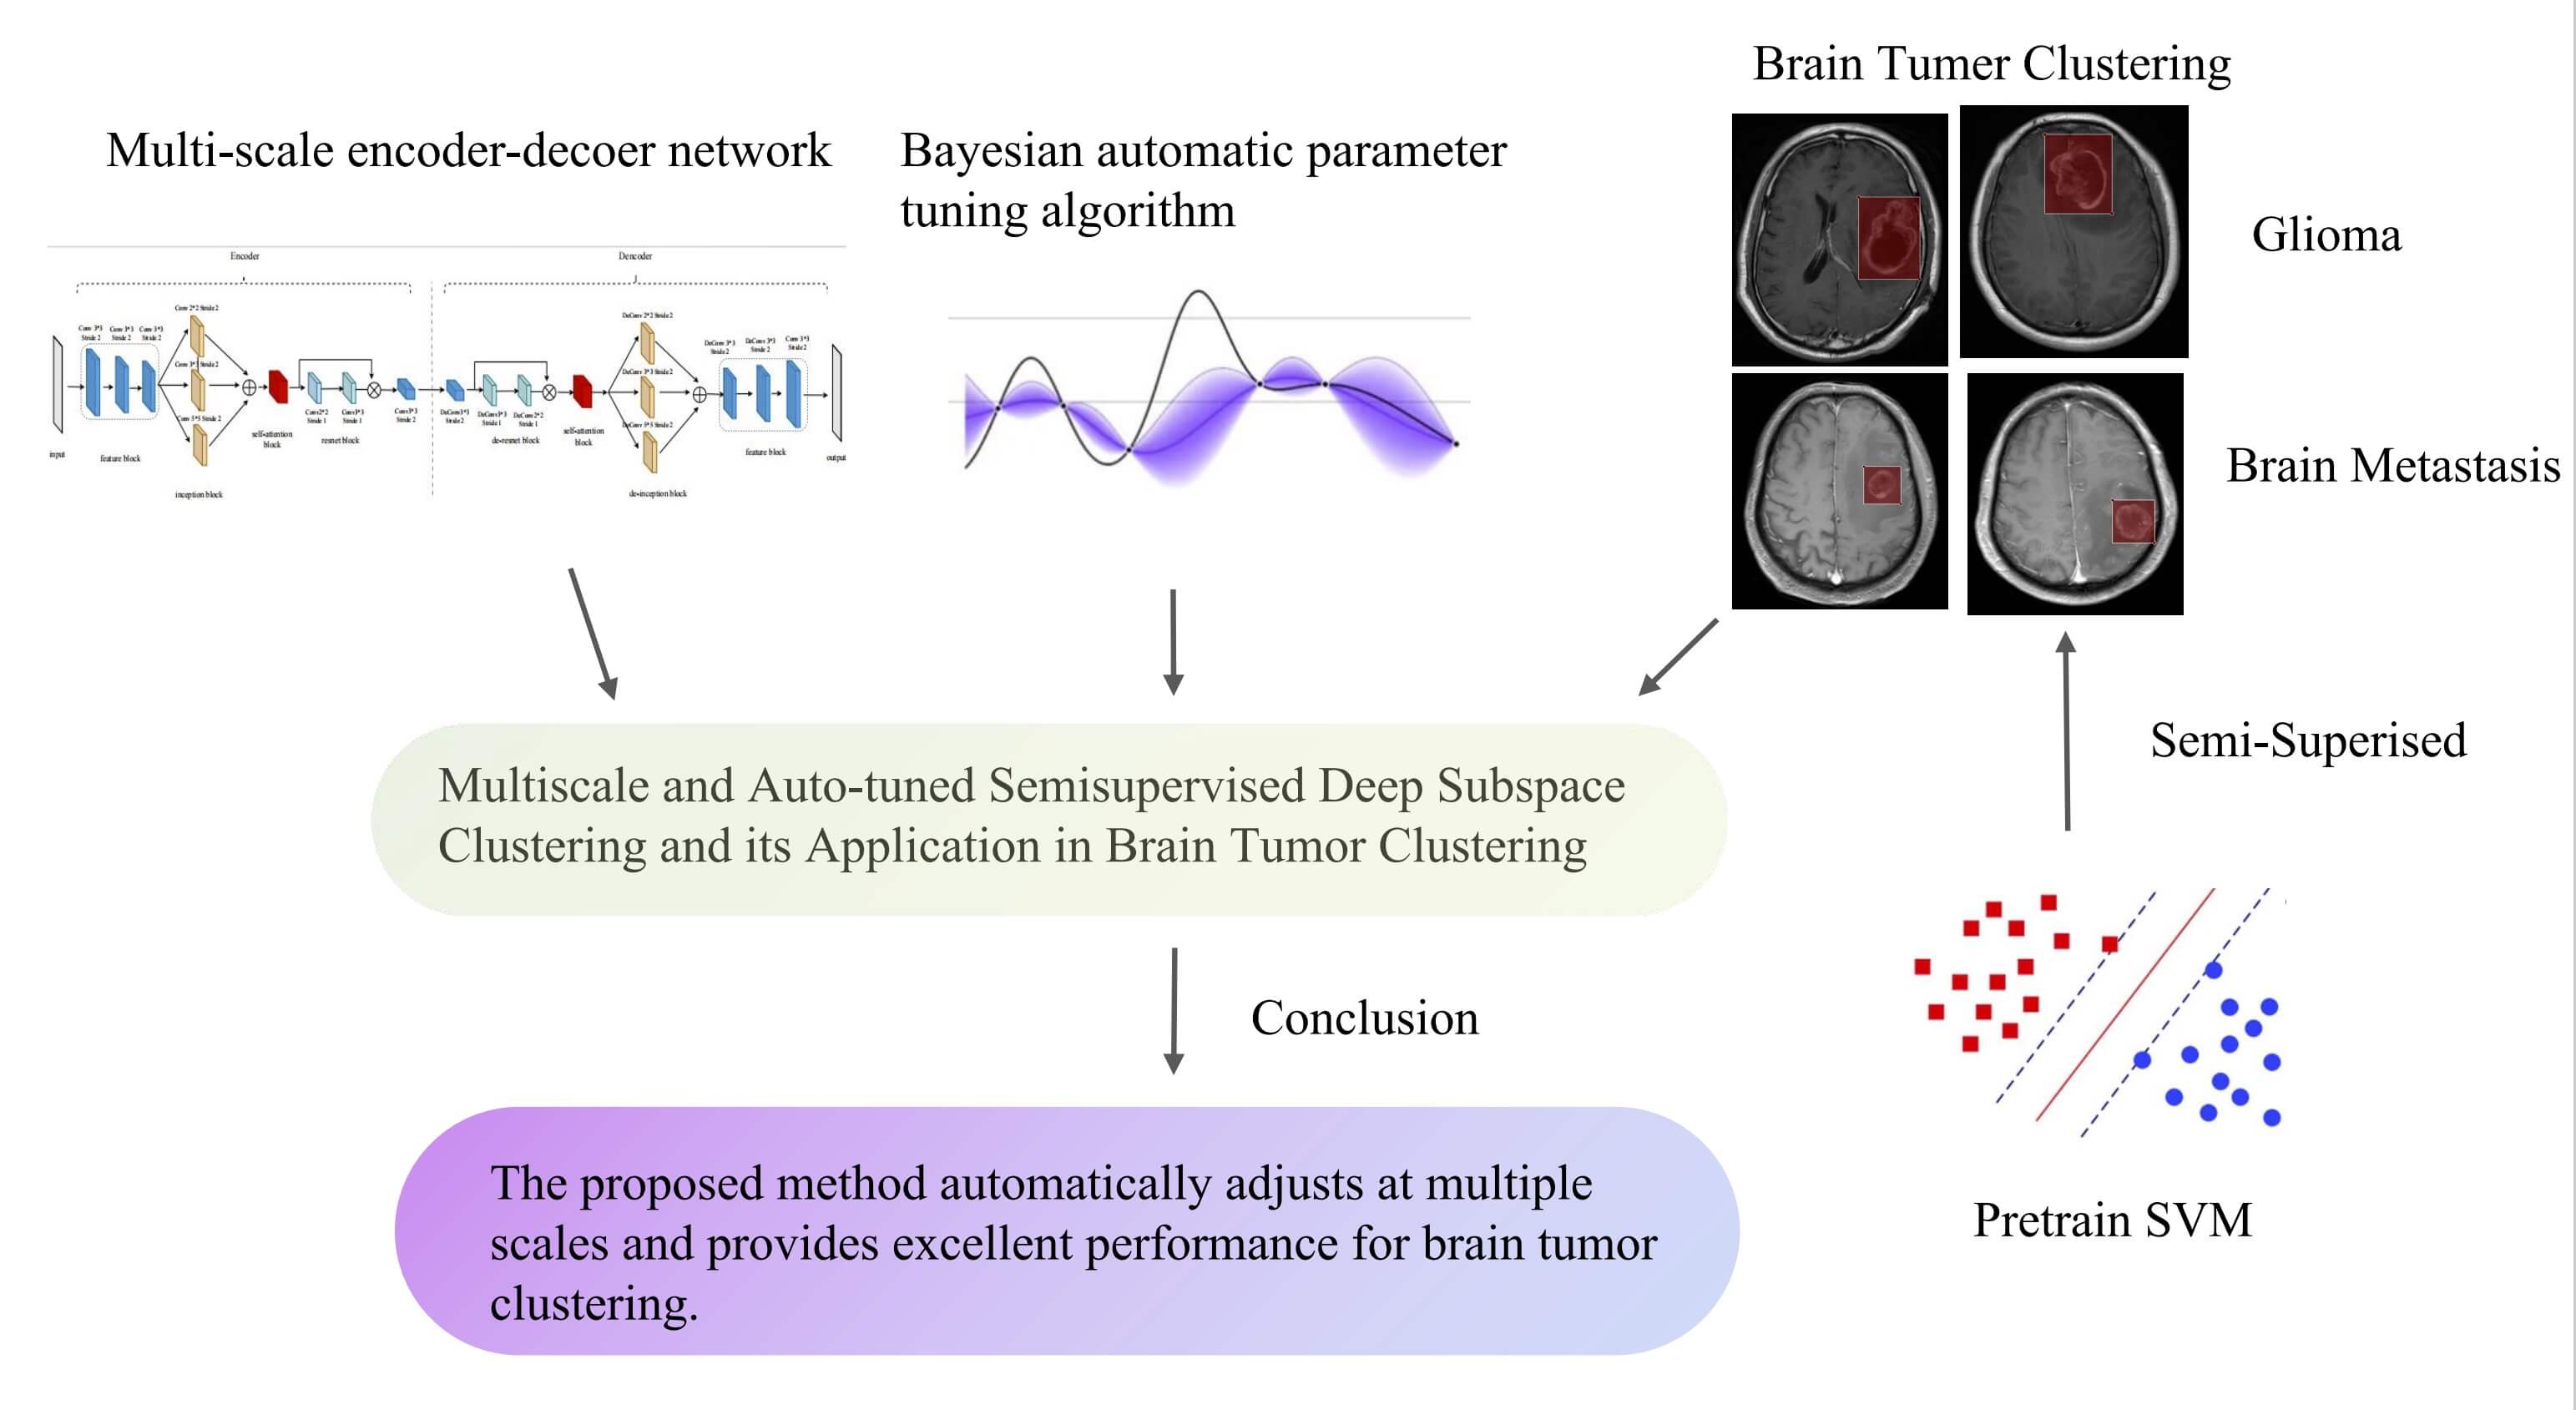 Multiscale and Auto-Tuned Semi-Supervised Deep Subspace Clustering and Its Application in Brain Tumor Clustering